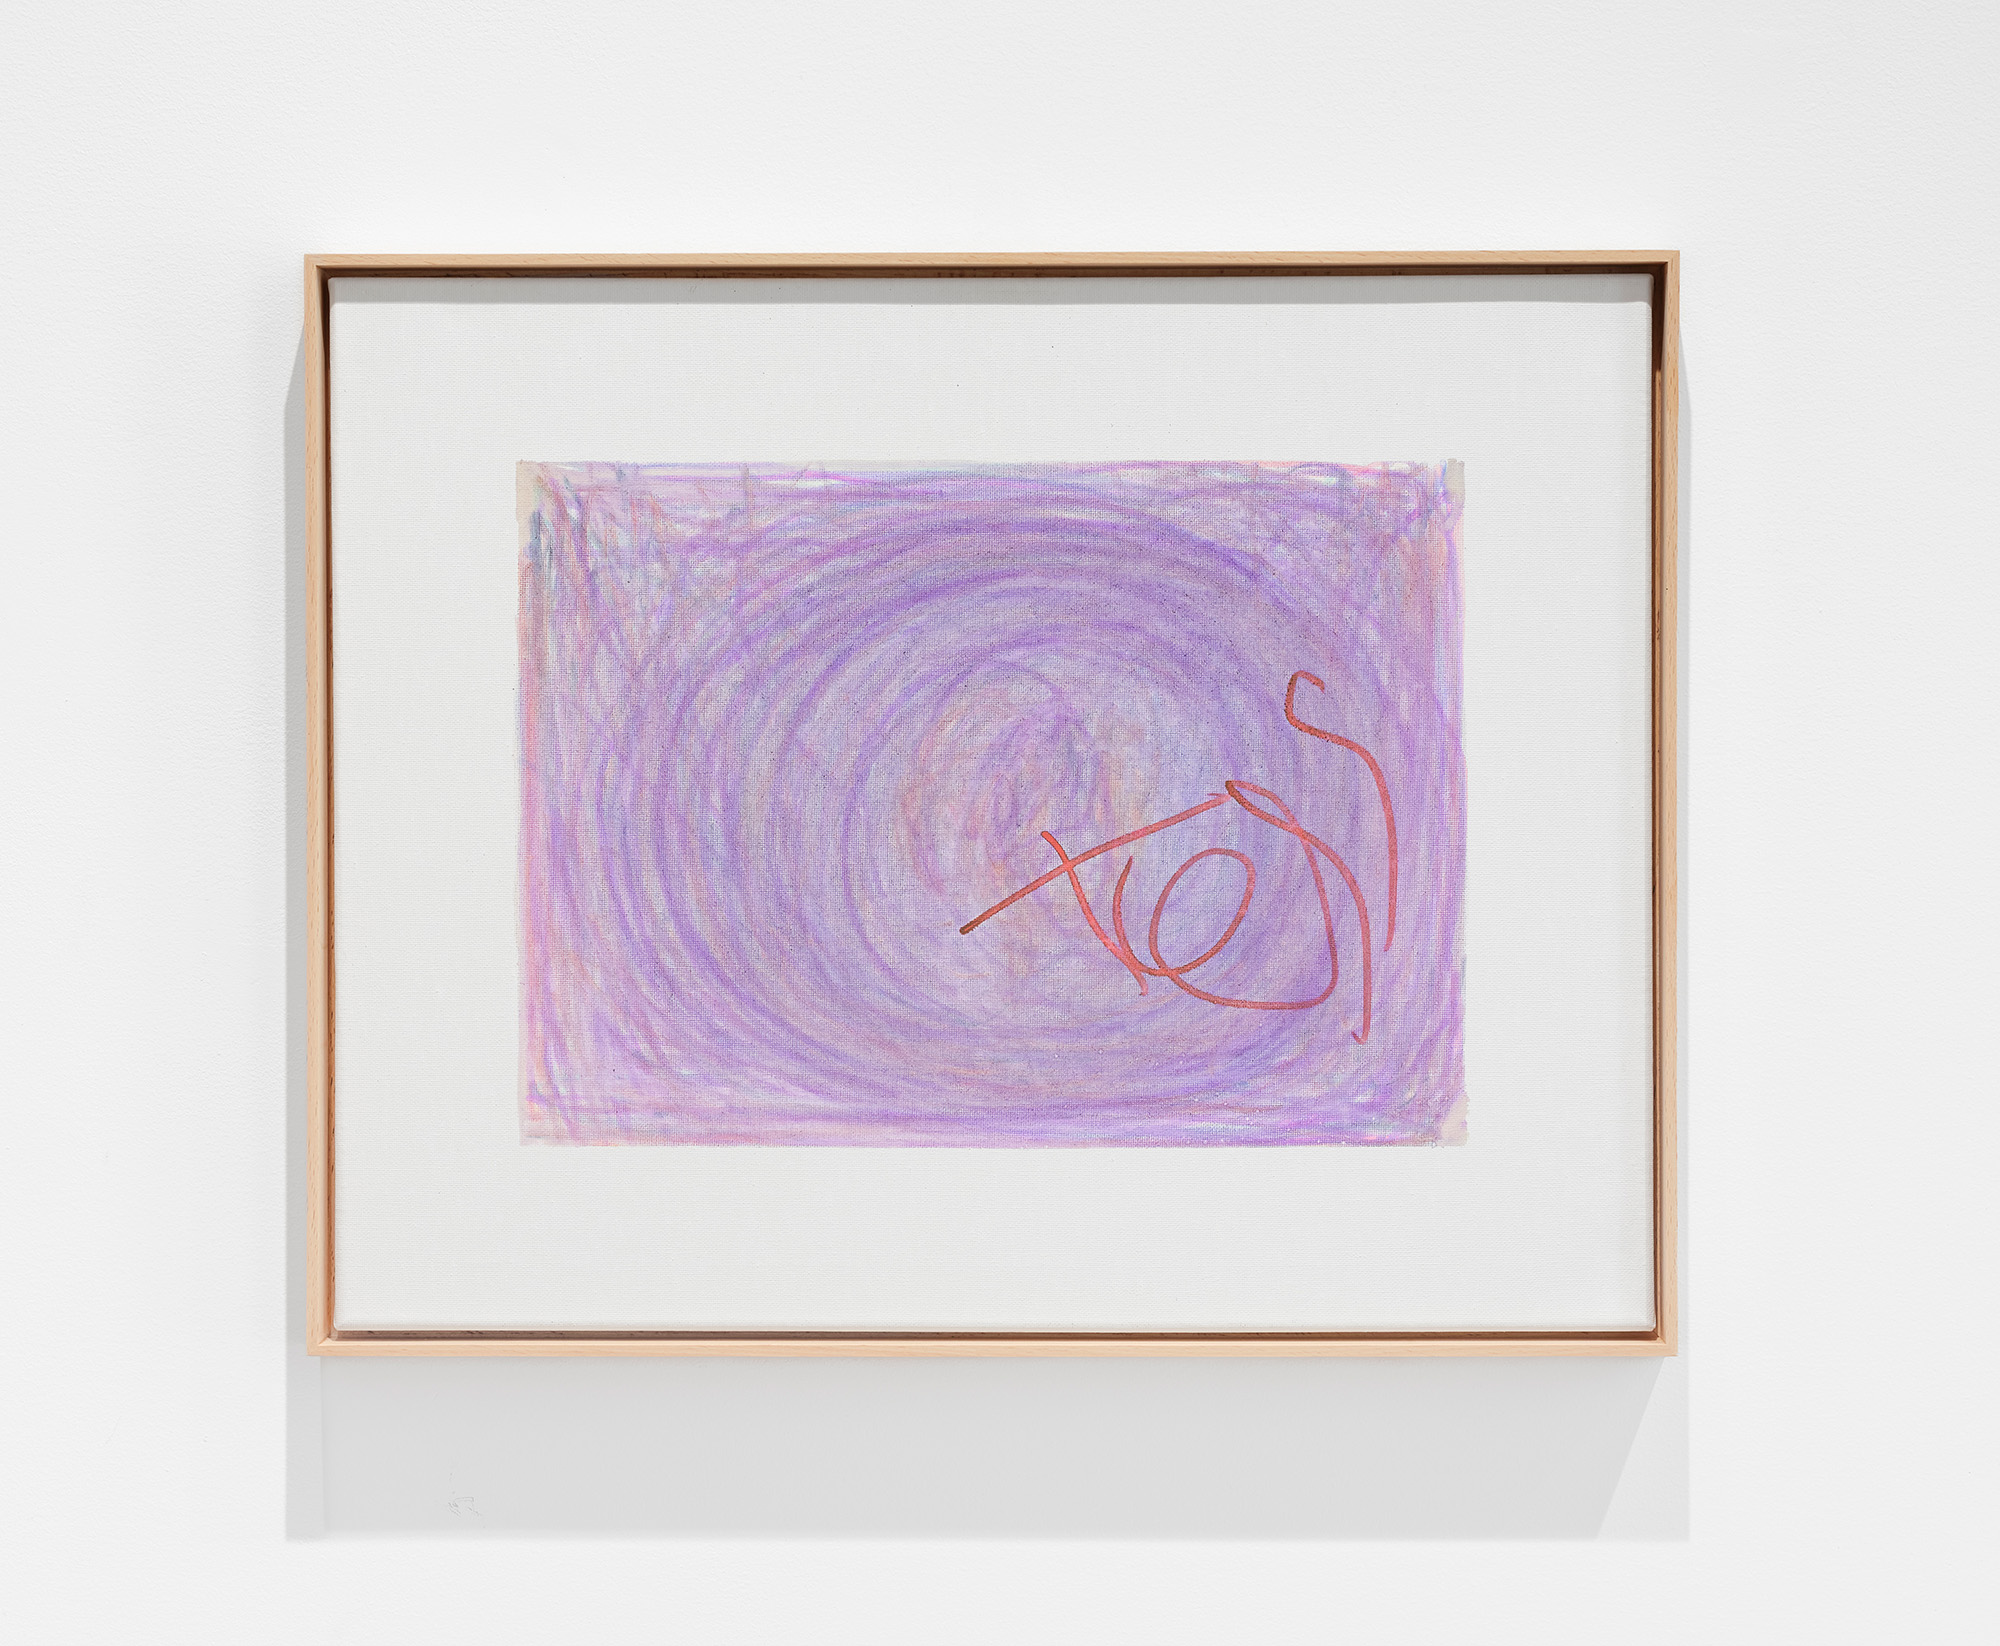 A rectangle swirl of purple marker and the a lopsided name "Tess" sits squarely in a white canvas